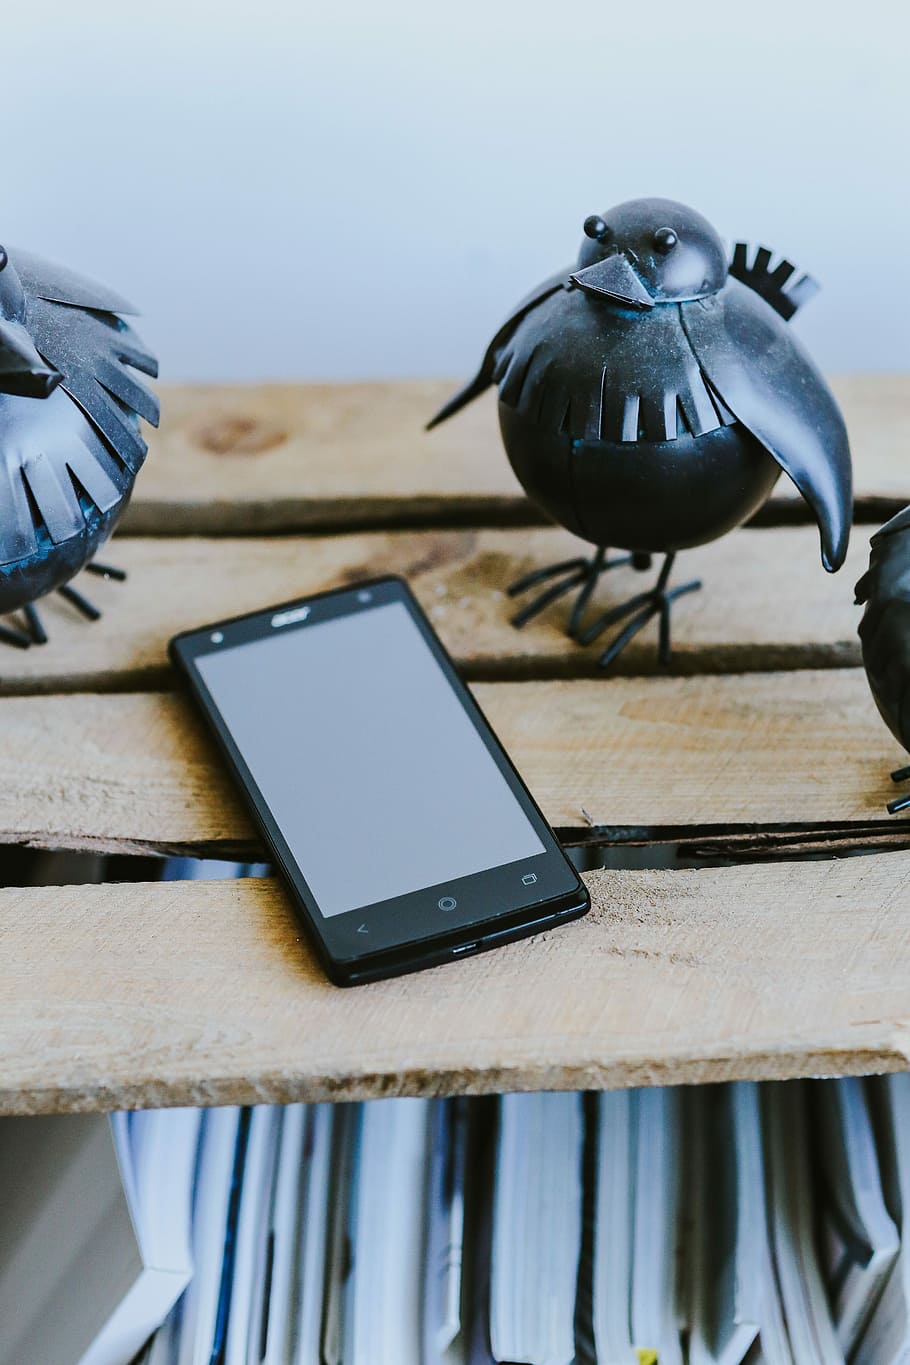 Little Black Plastic Birds With A Smartphone On A Shelf, - Iphone - HD Wallpaper 